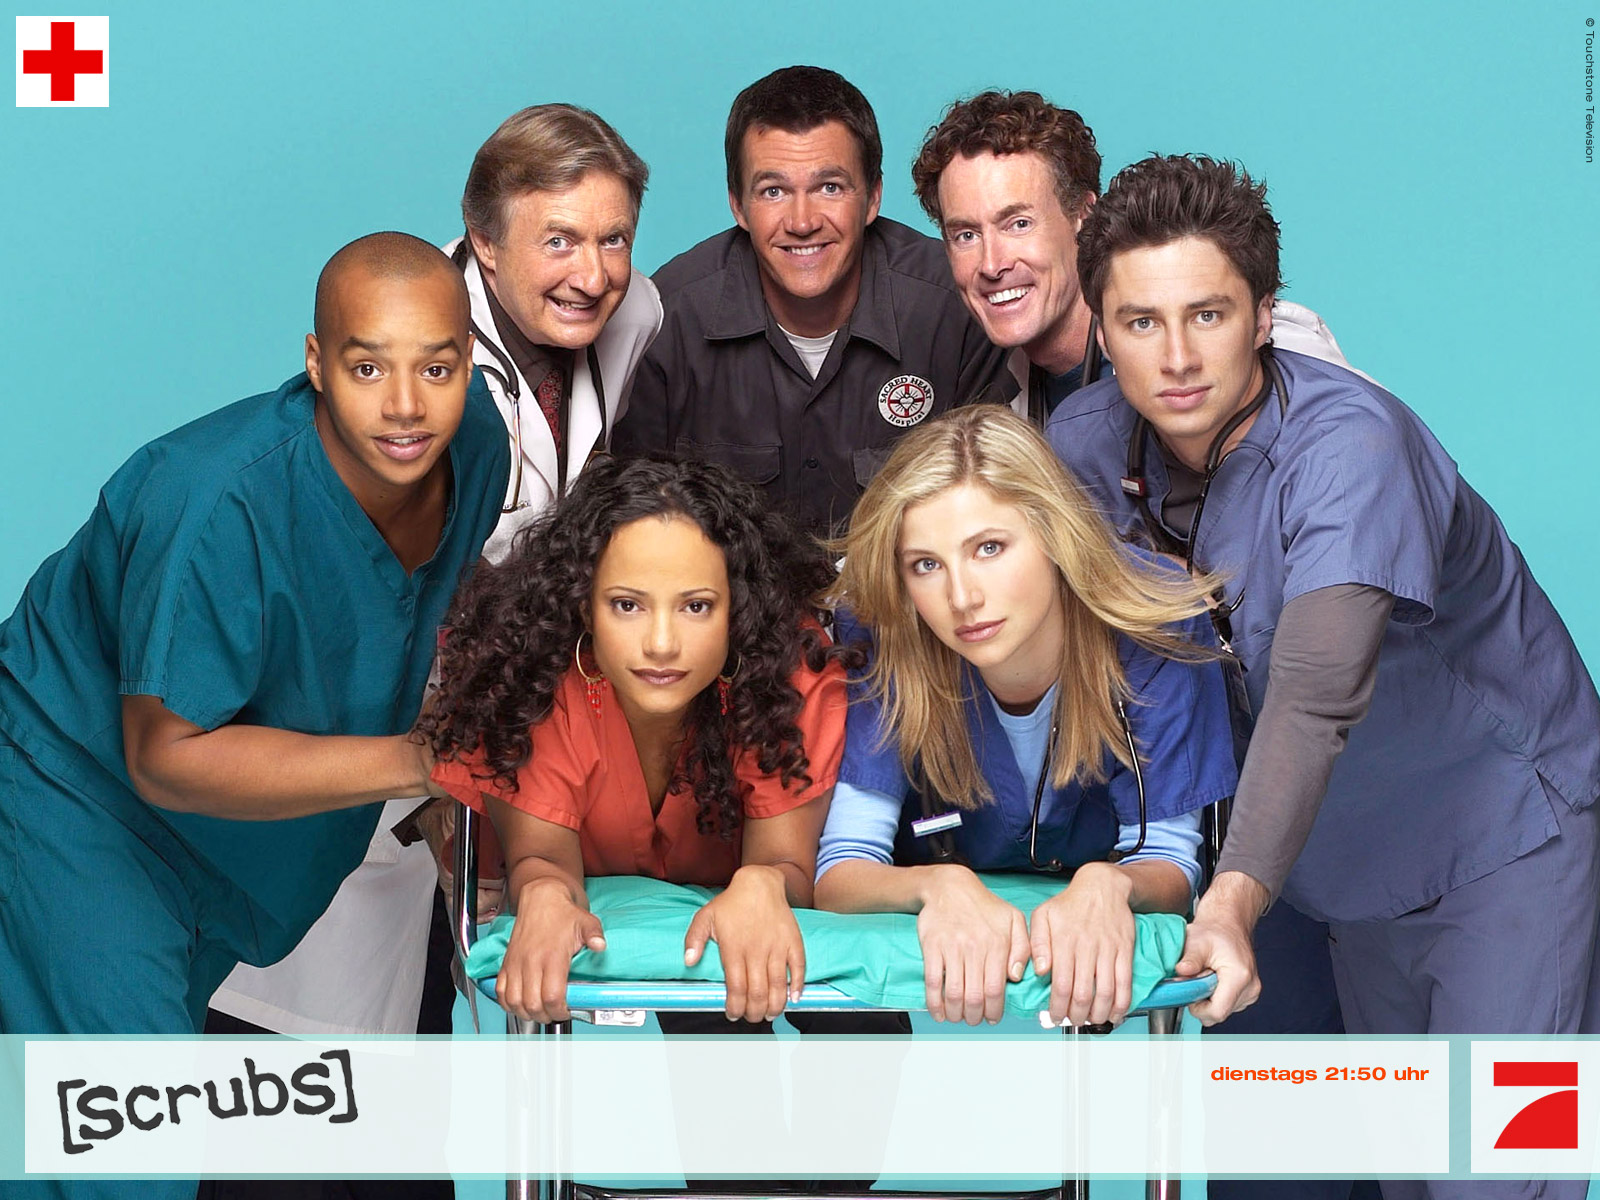 The Scrubs cast is captured in this HD desktop wallpaper, featuring characters like Turk, Cox, Elliot, and more.